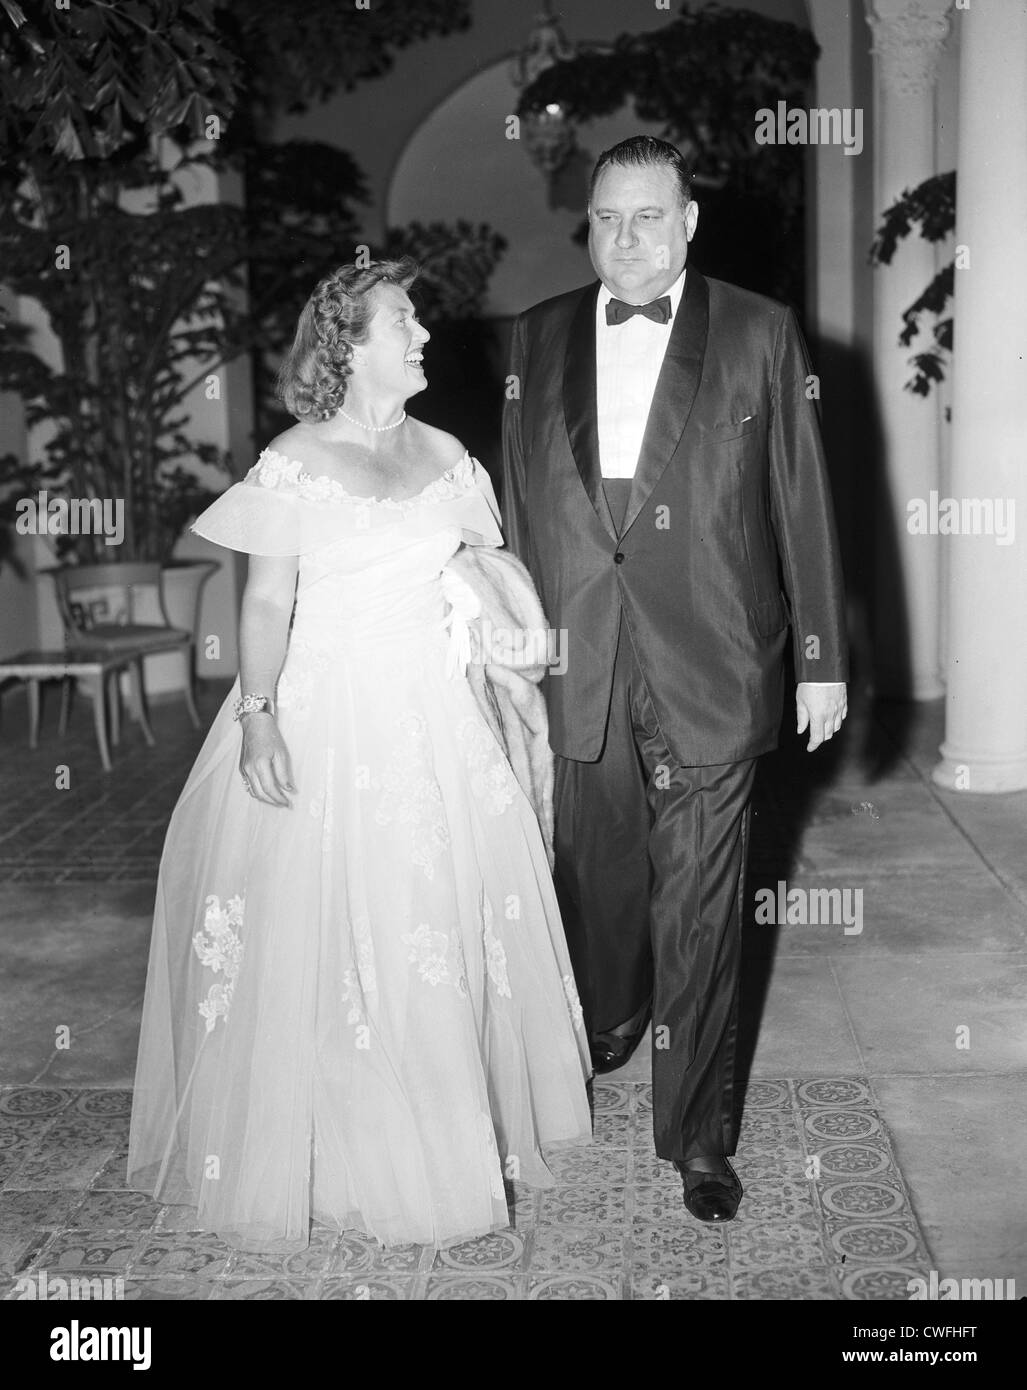 John Jacob Astor VI and Mrs Beatrice Adams at the Everglades Club in Palm Beach, Florida, 1940s Stock Photo